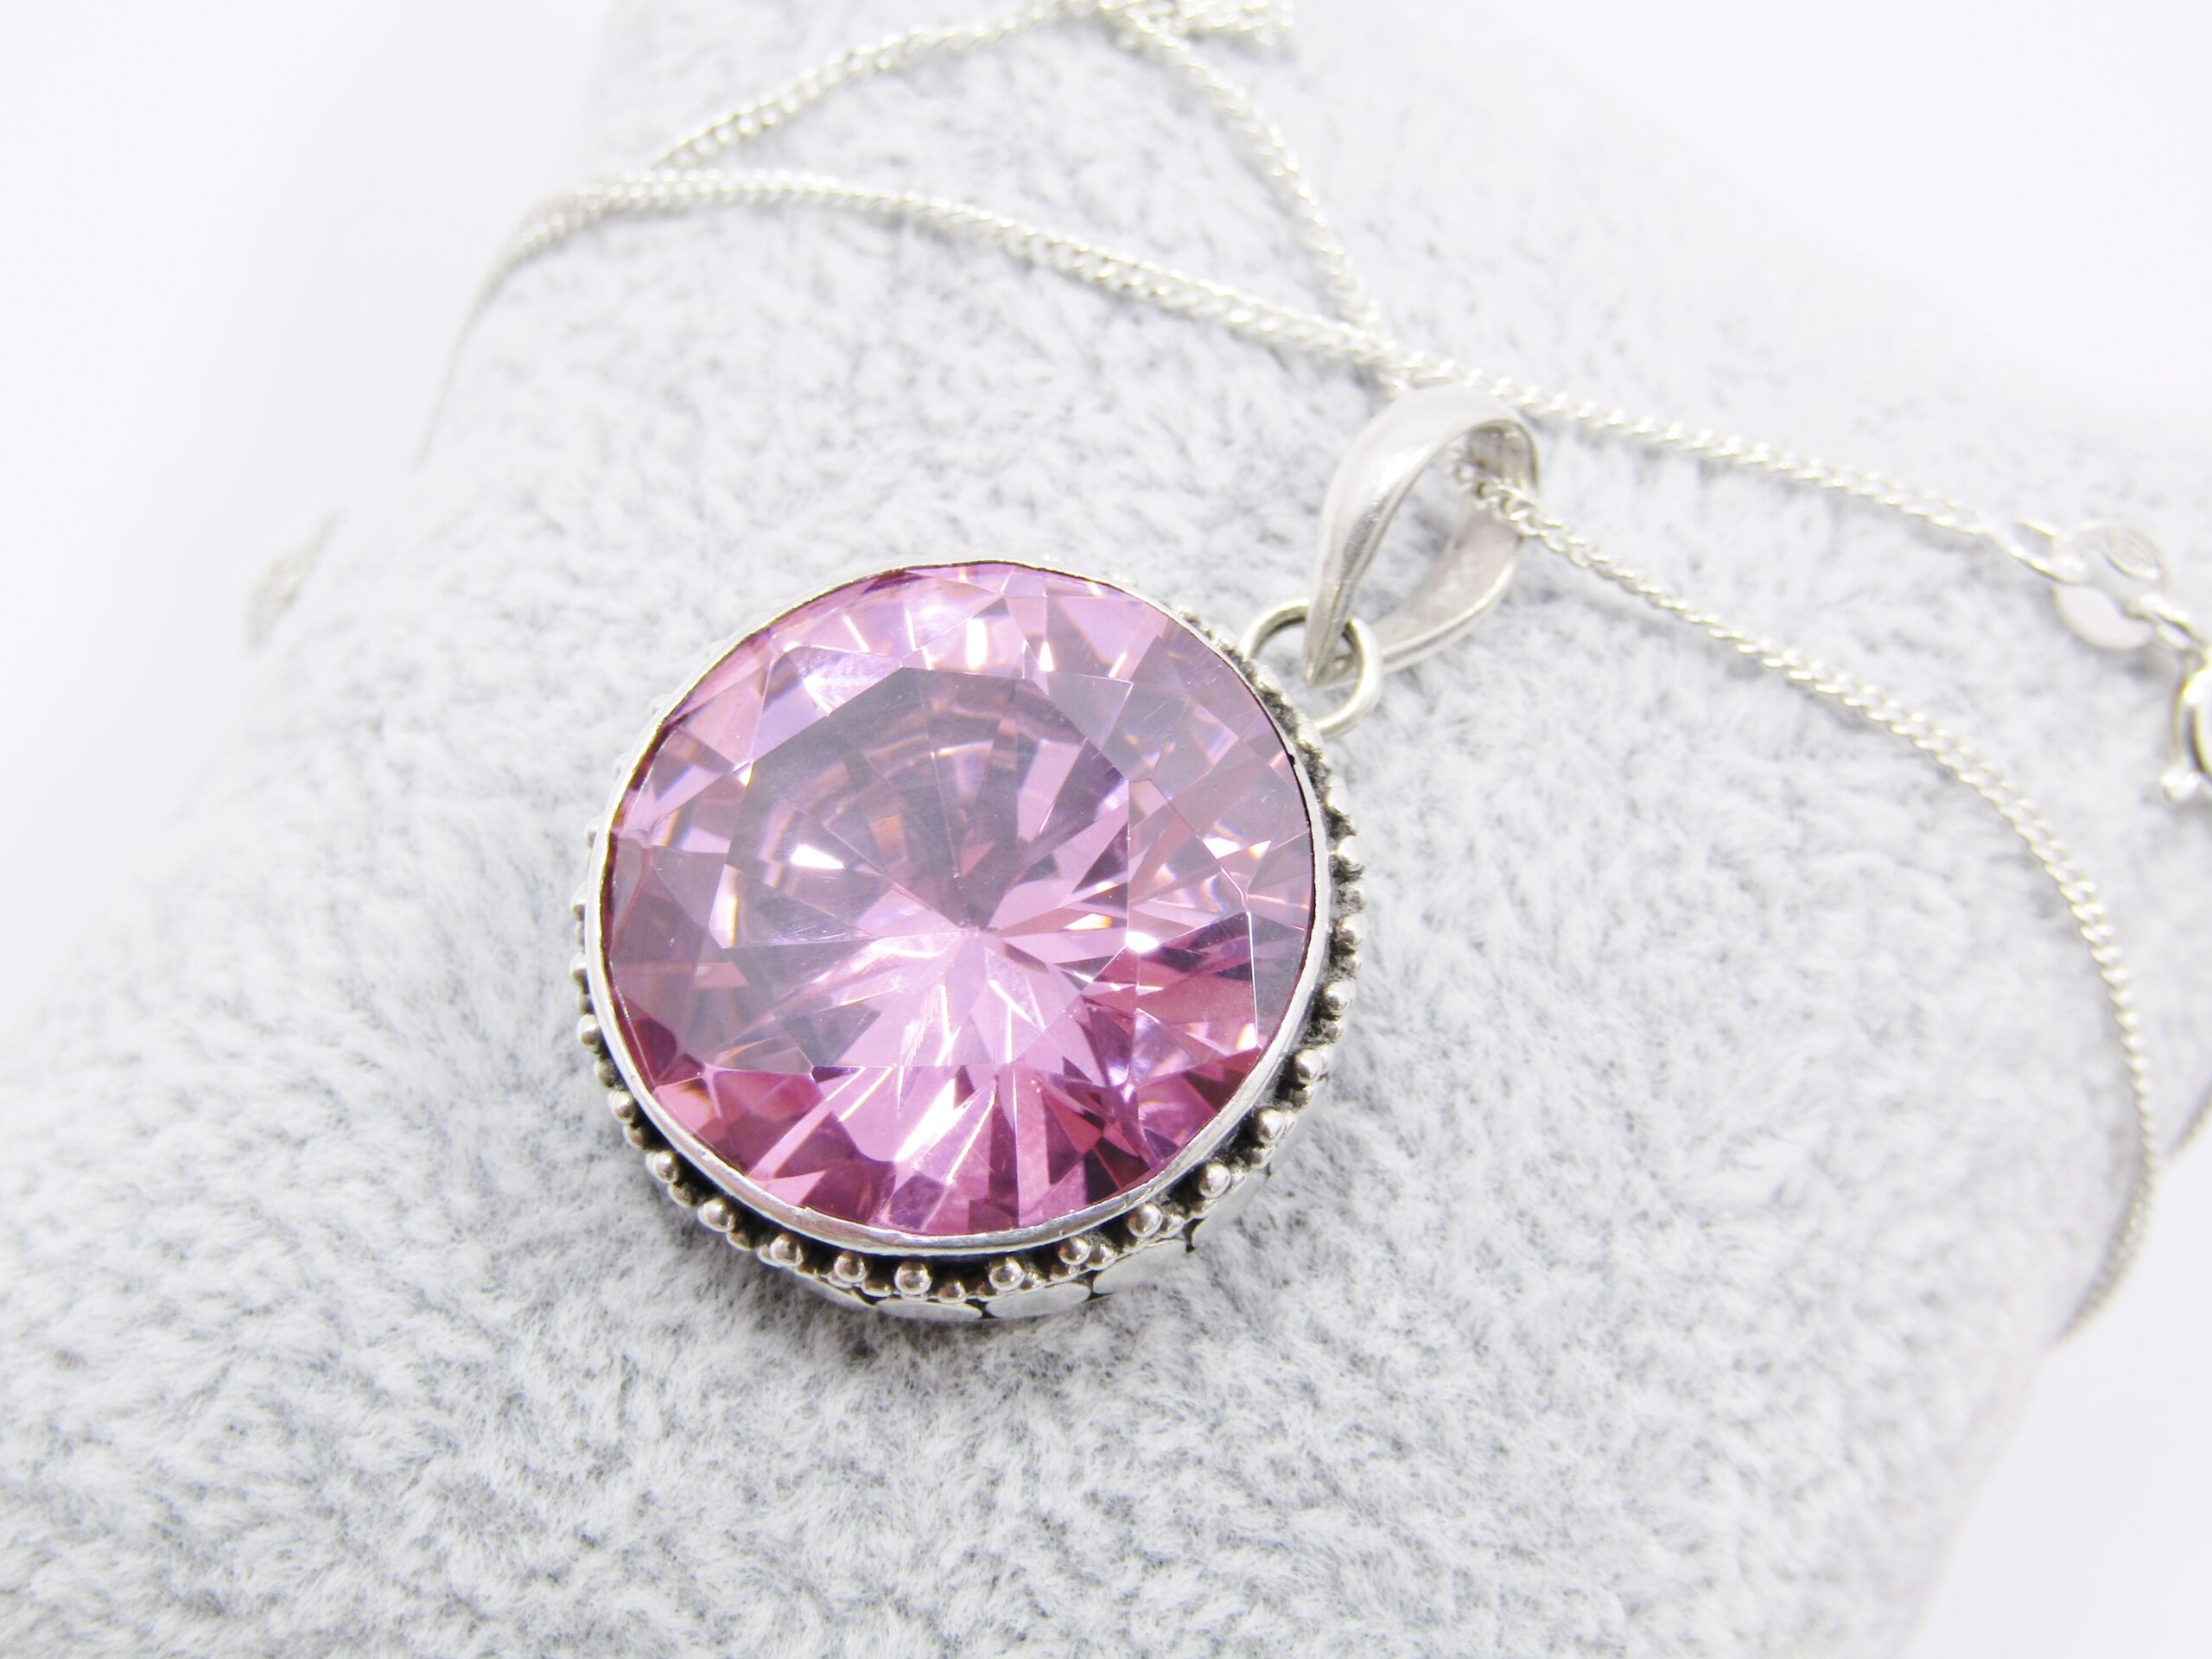 A Lovely Large Pink Zirconia Pendant on Chain in Sterling Silver